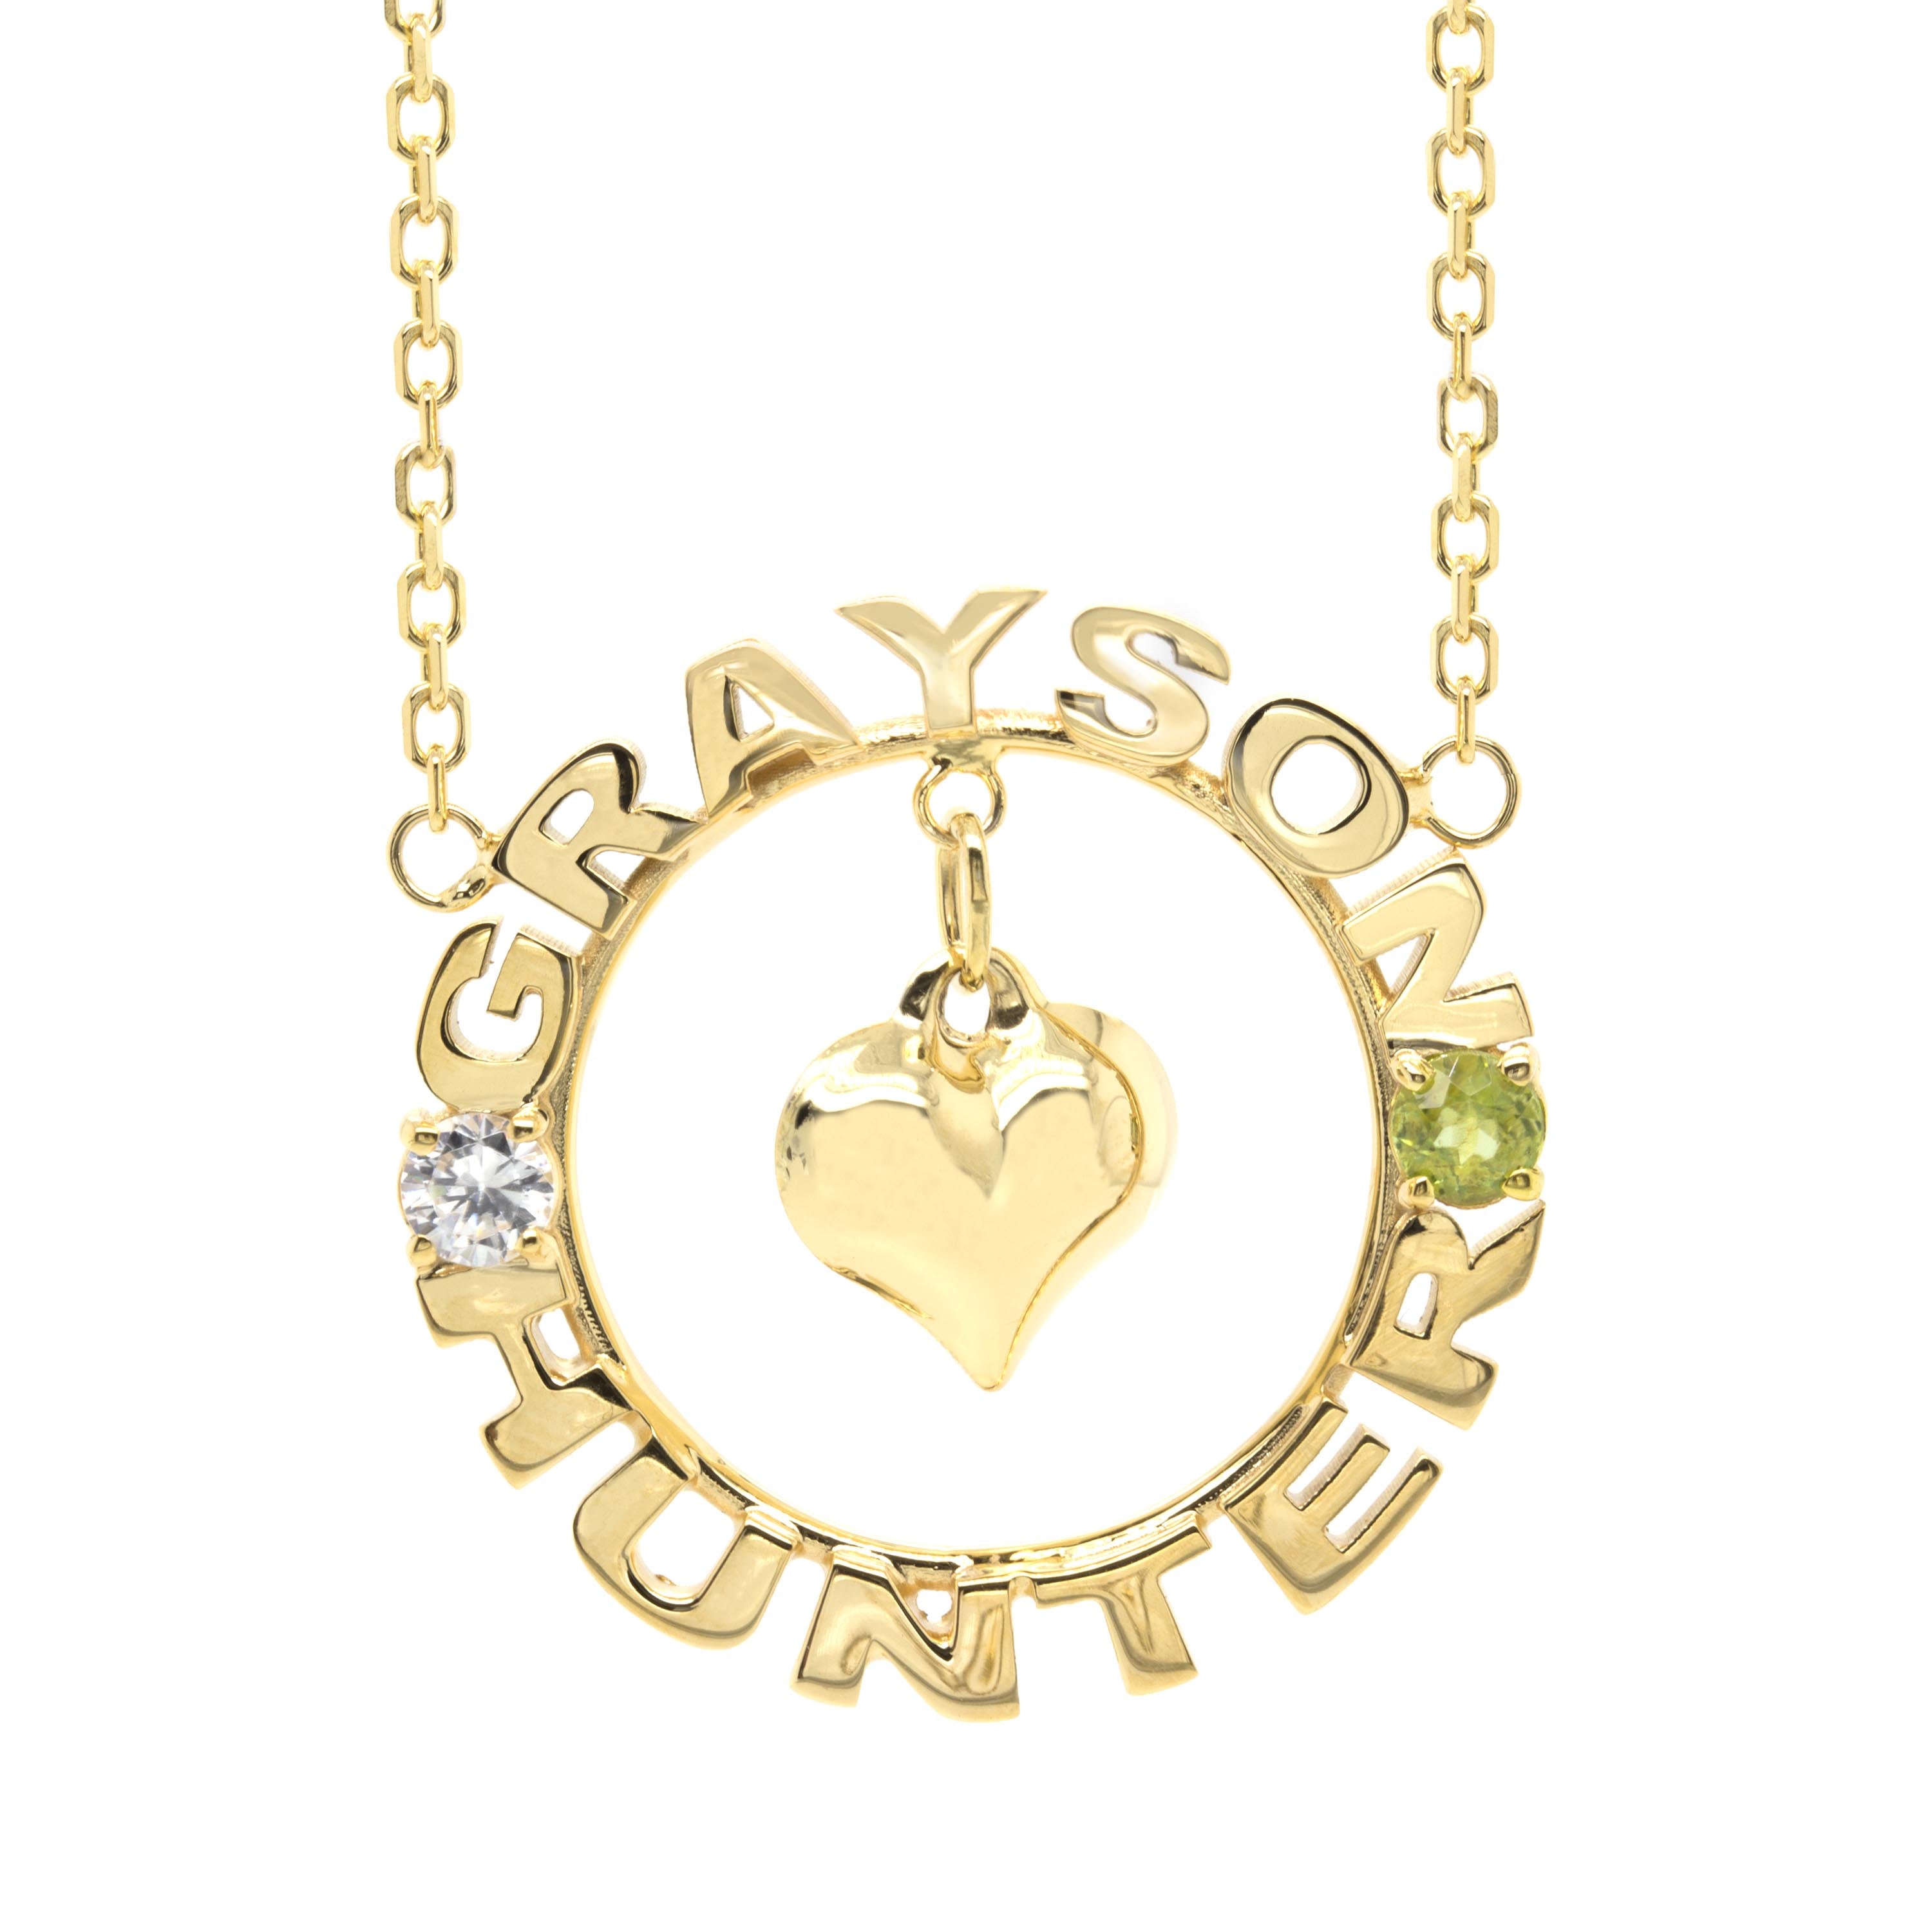 Gold circular pendant with a custom letter and heart shape on a white background